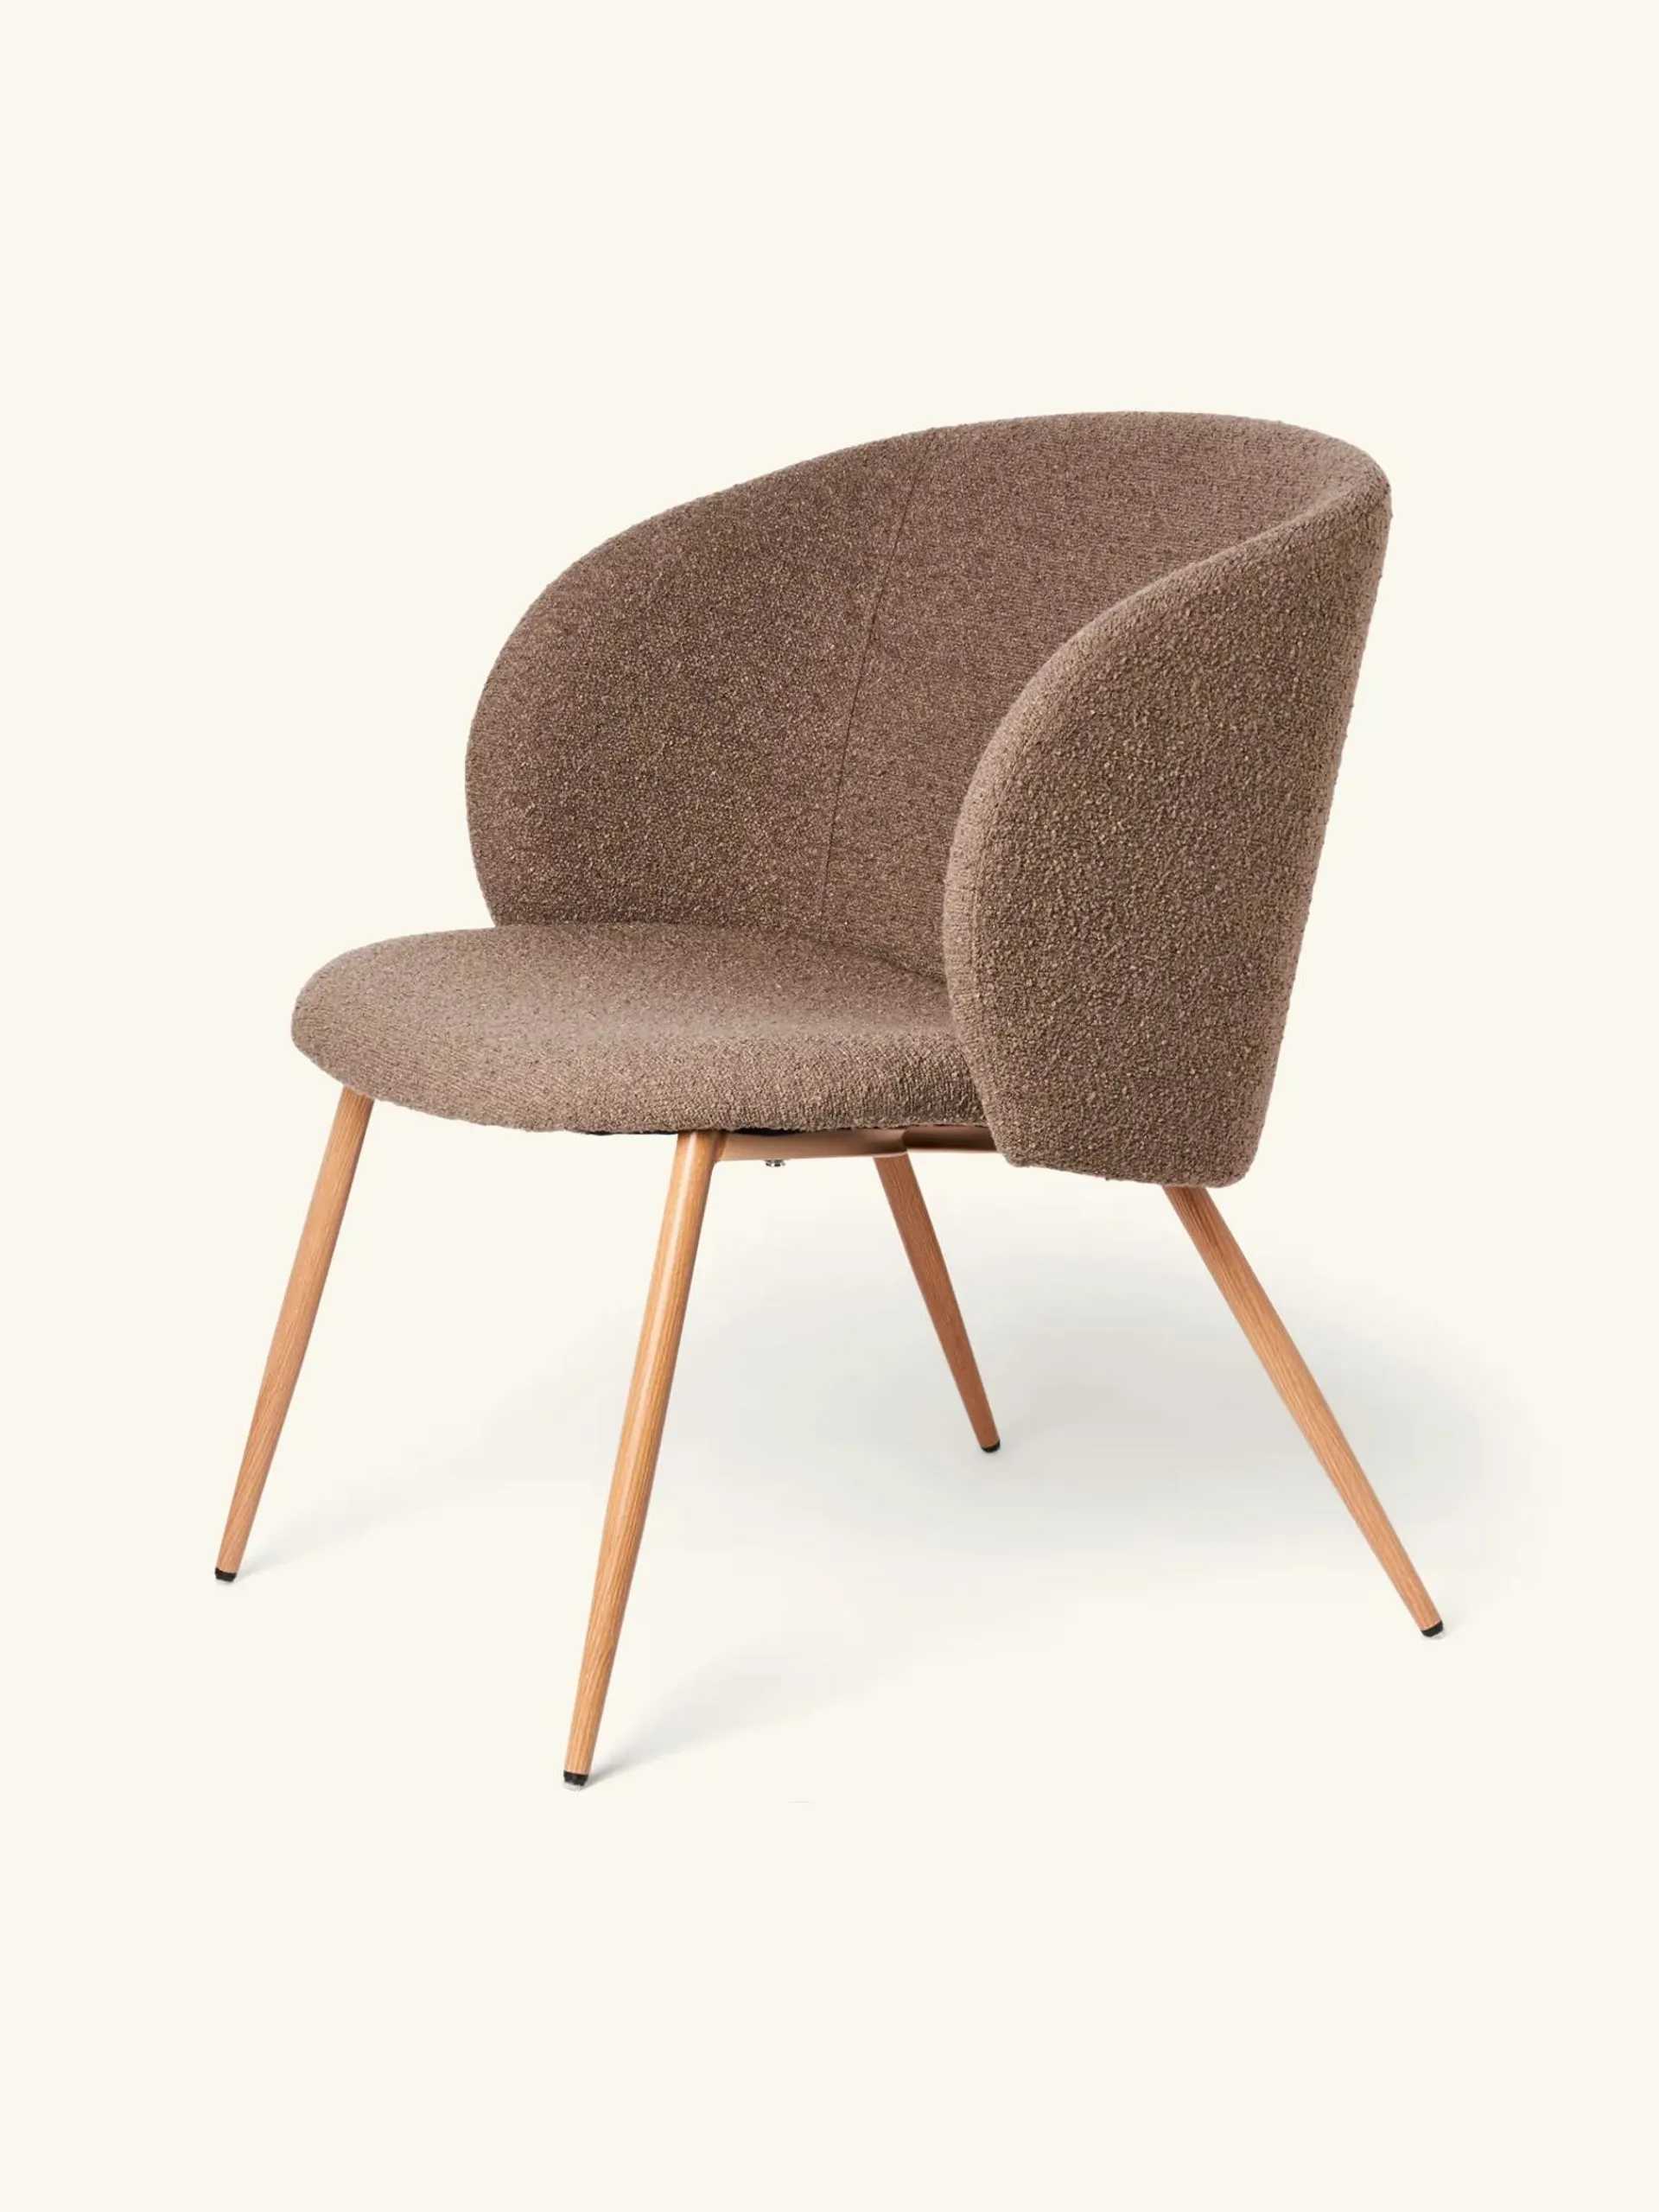 Lounge chair with bouclé fabric